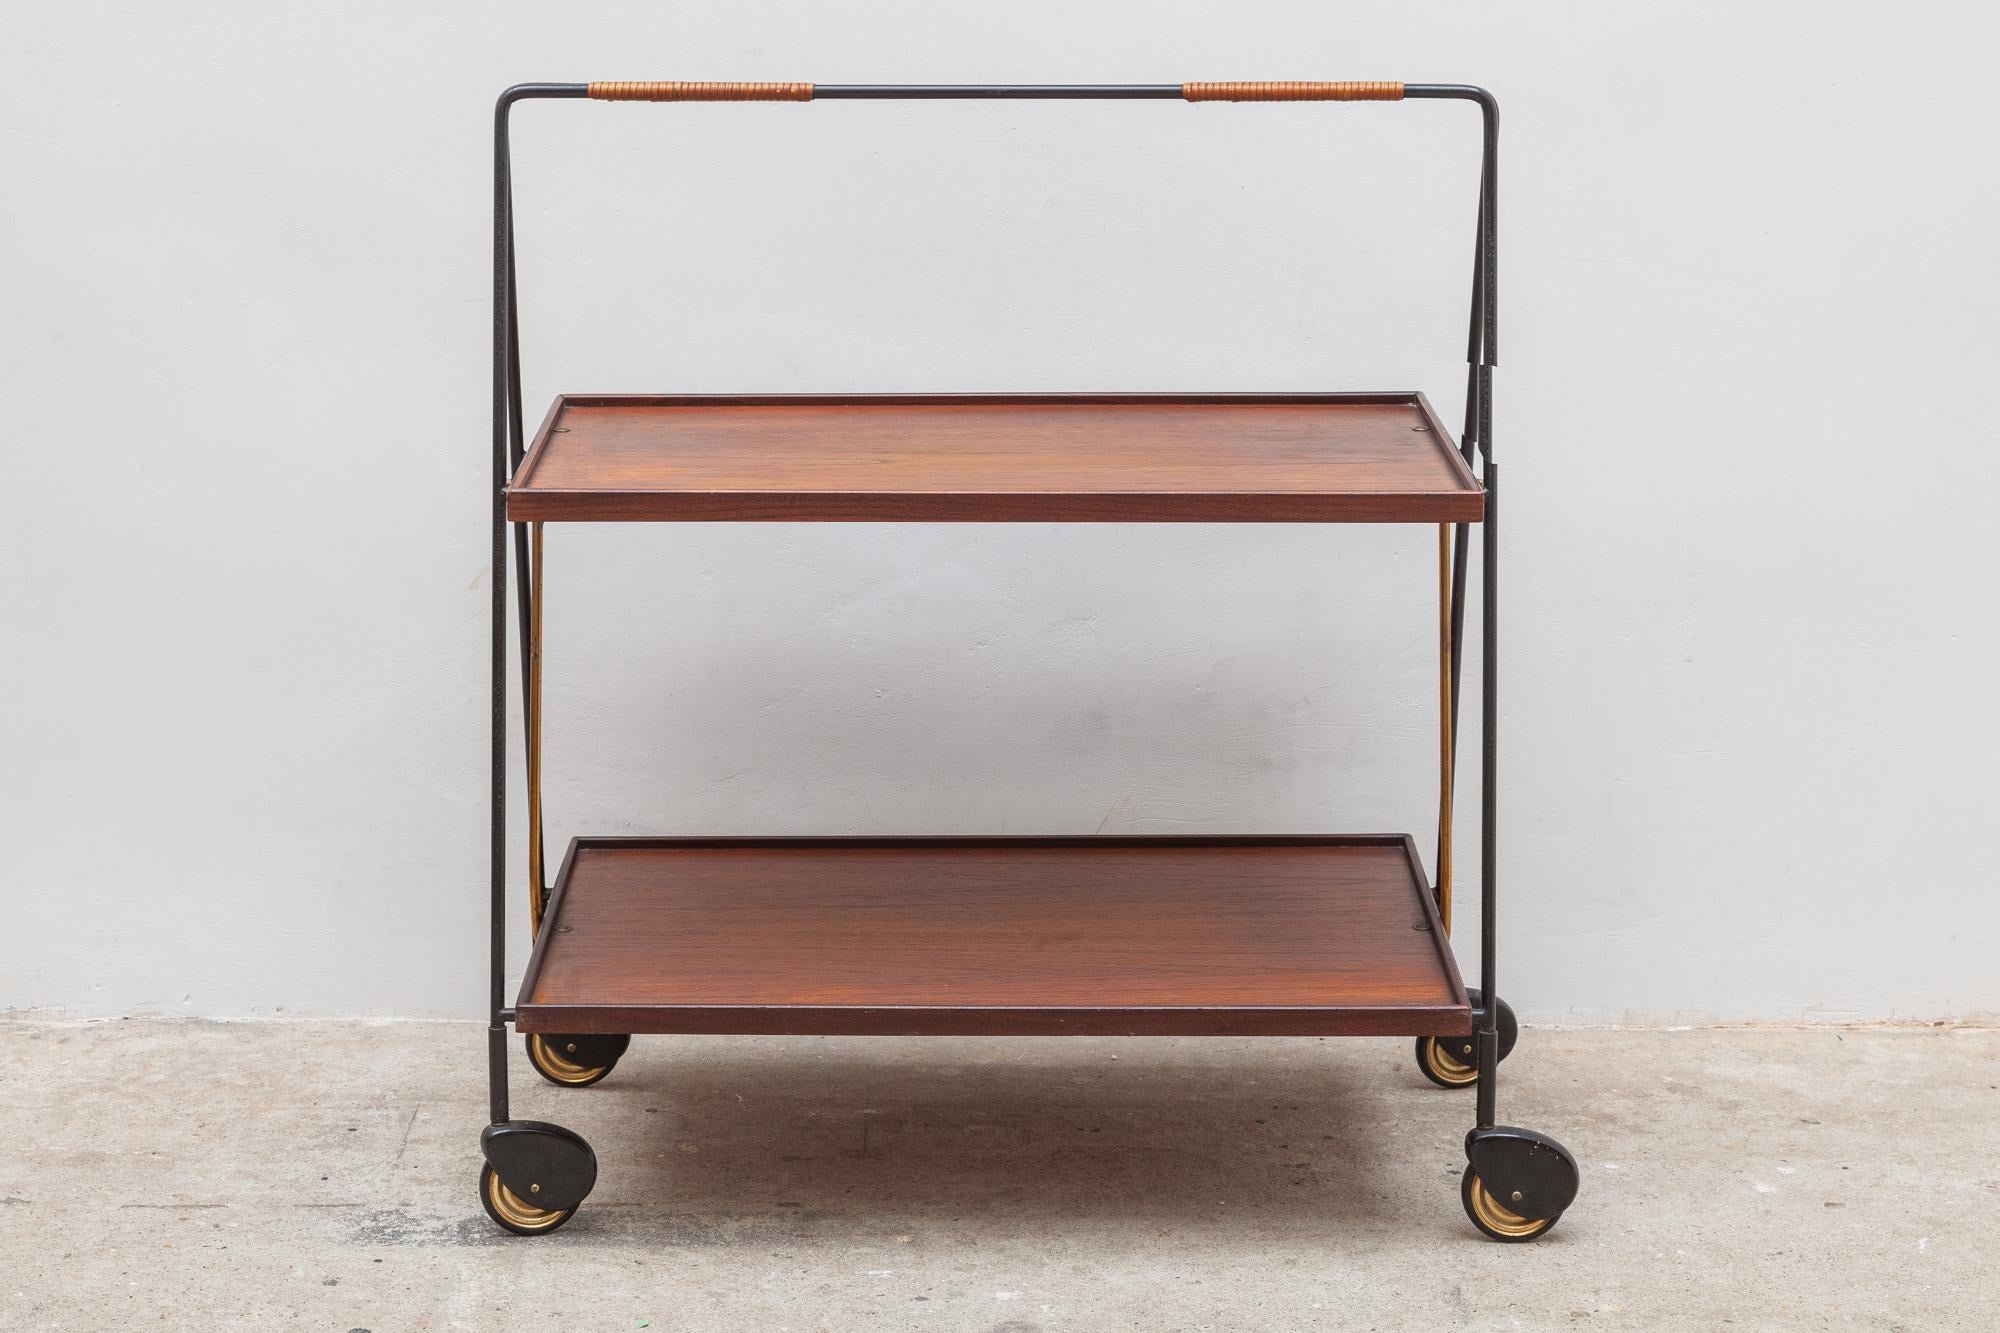 A beautiful teak folding trolley with a wrought iron frame, stable on four wheels and practical to use with a beautiful patina.